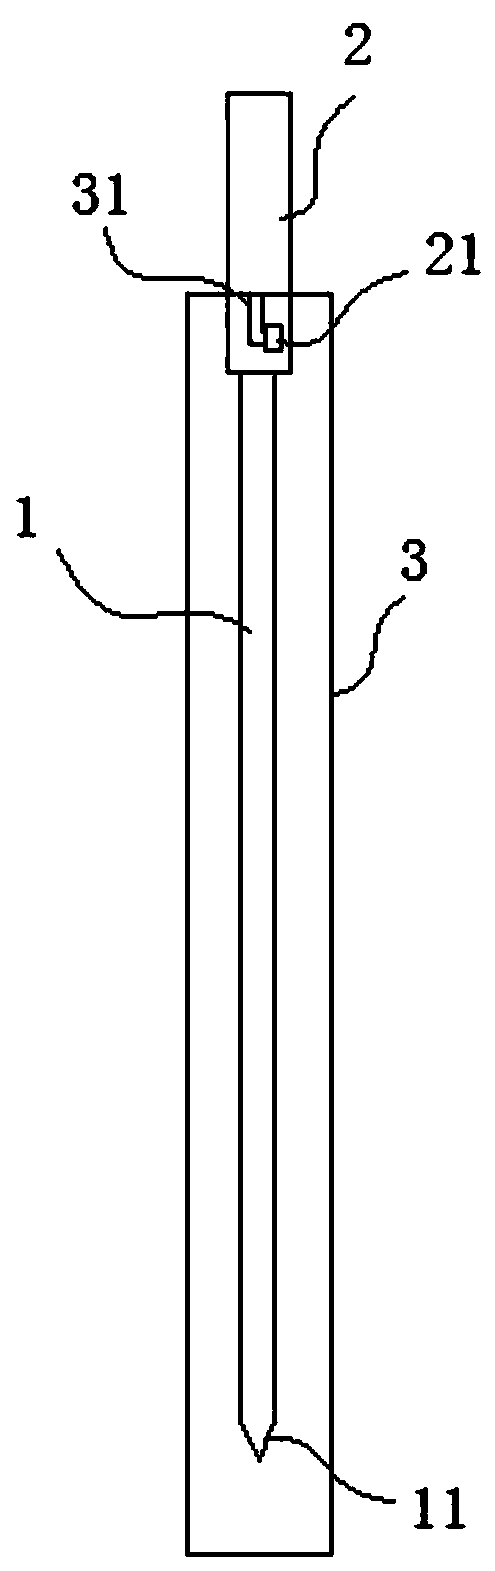 Needle structure for acupuncture treatment